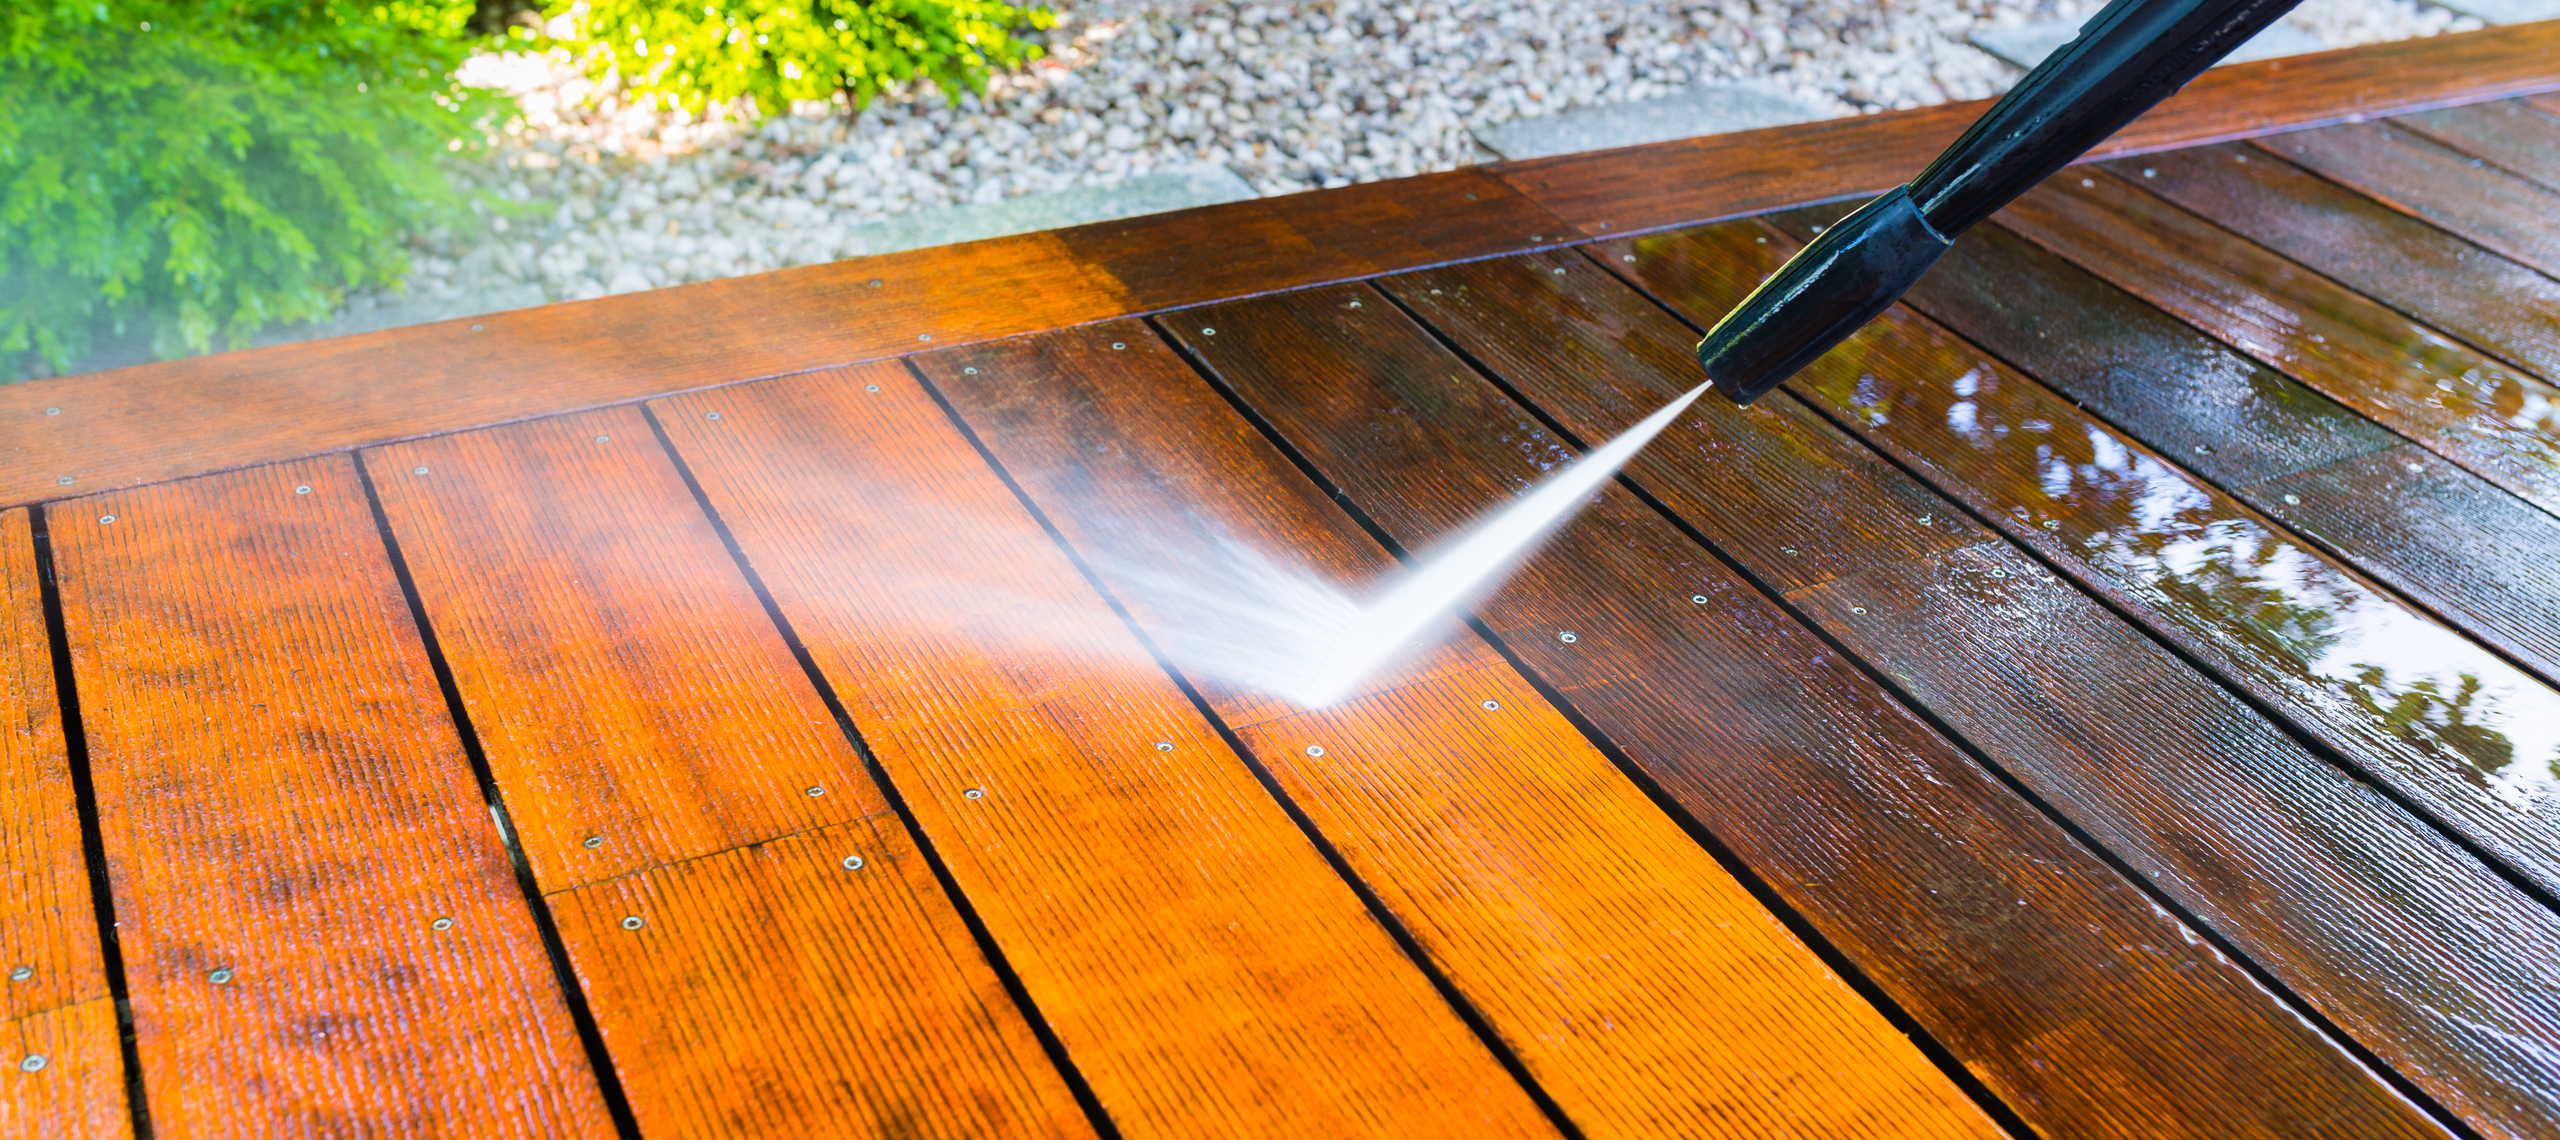 Power Washing Company Helping Homeowners and Businesses Lower Cleaning Costs